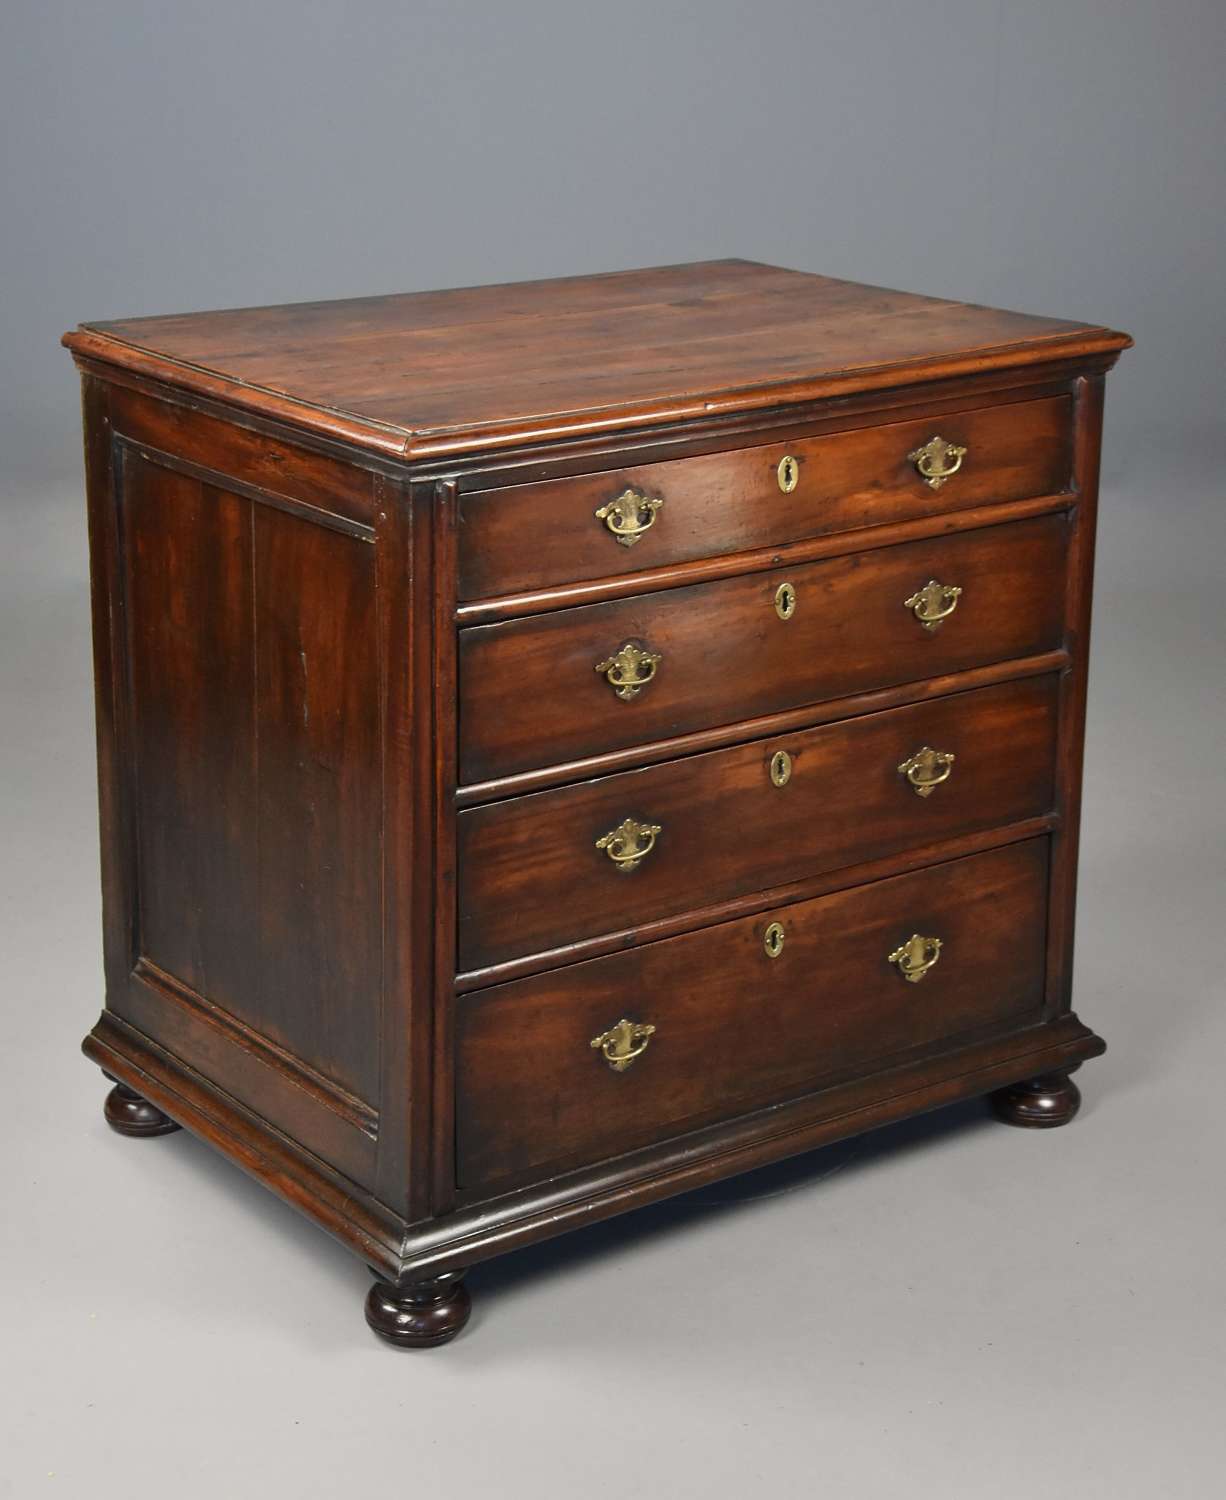 Rare late 17th century fruitwood chest of drawers of superb colour